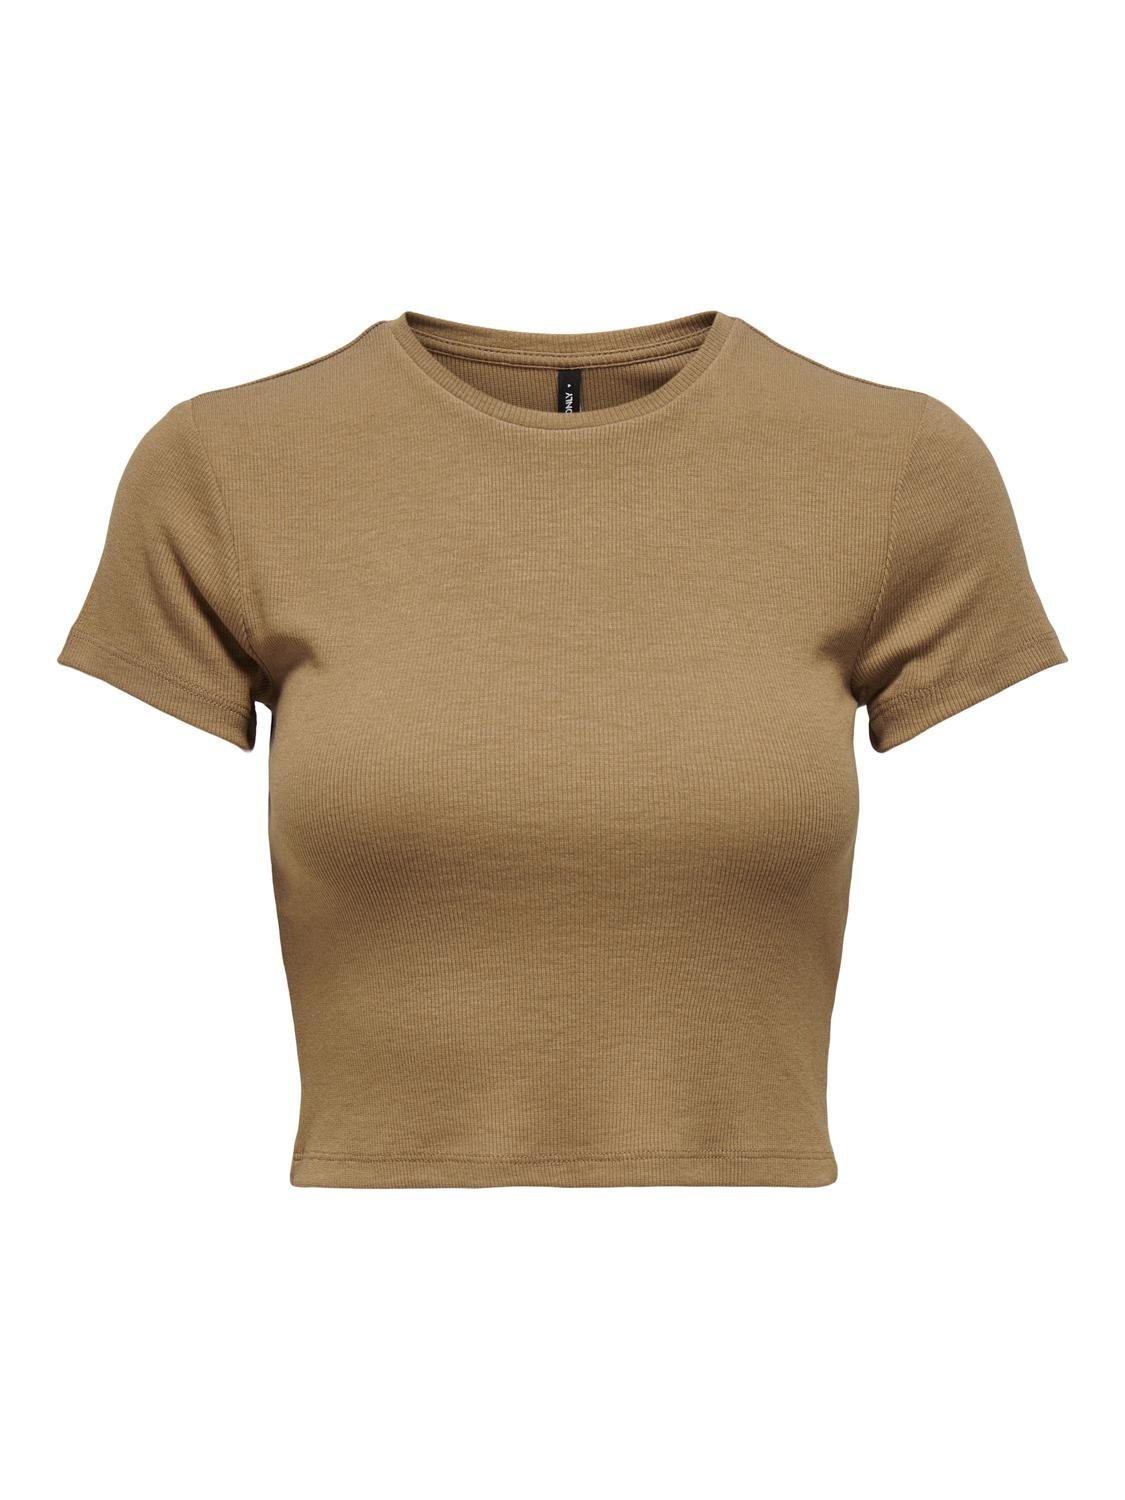 ONLY Regular Fit O-Neck Top -Toasted Coconut - 15301181